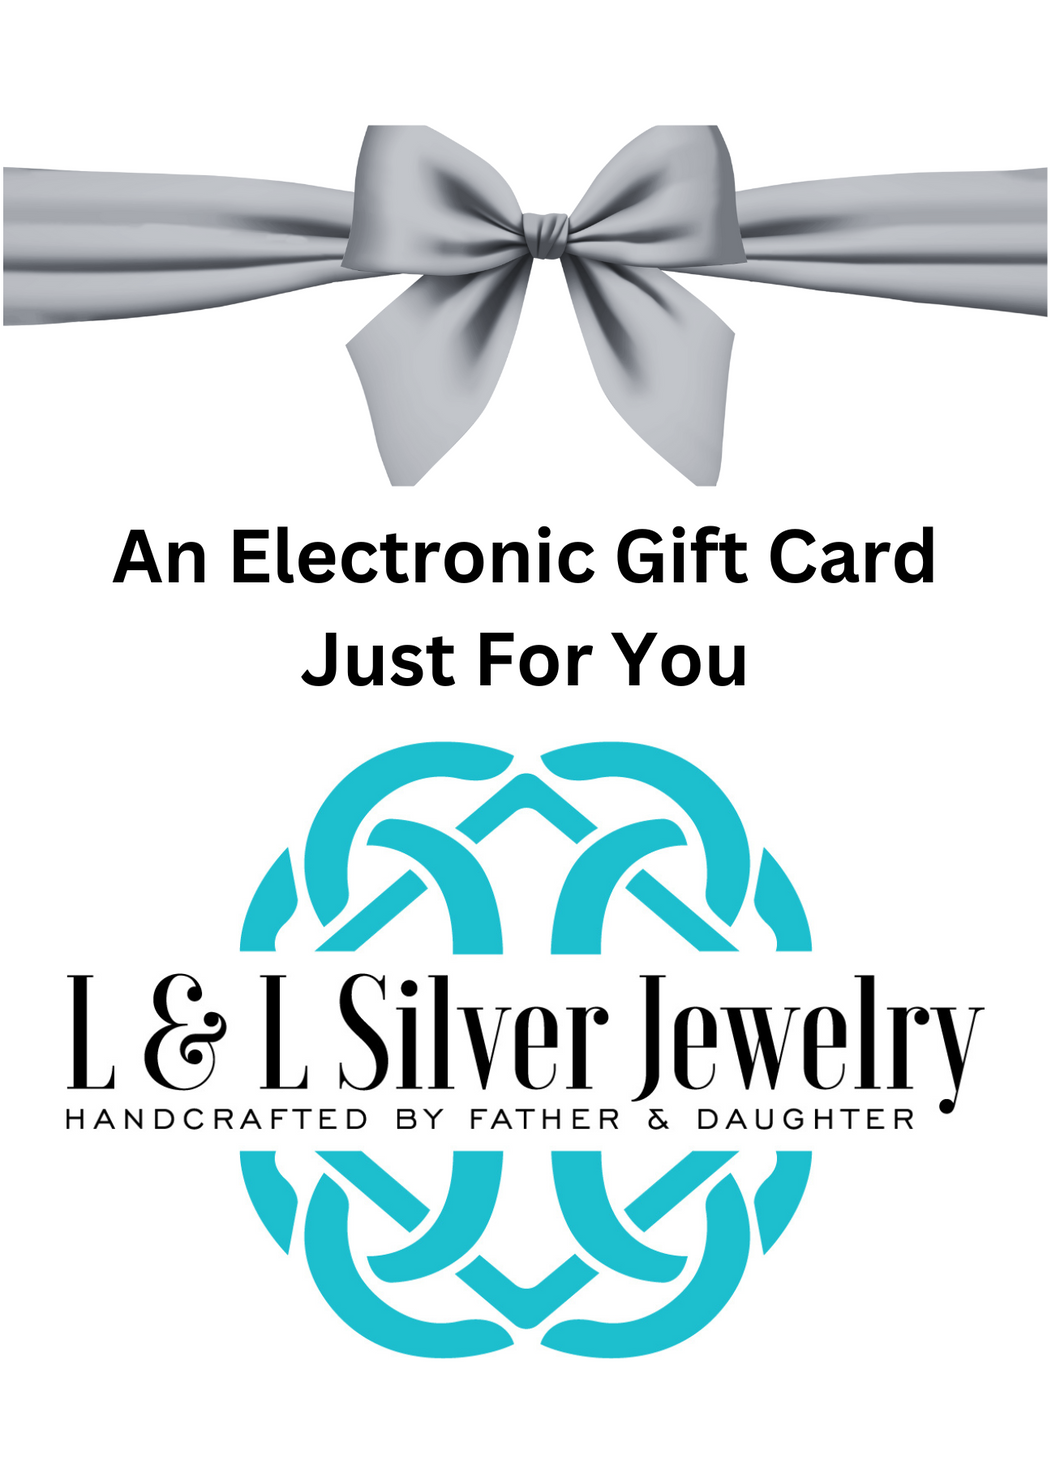 $50 Electronic Gift Card